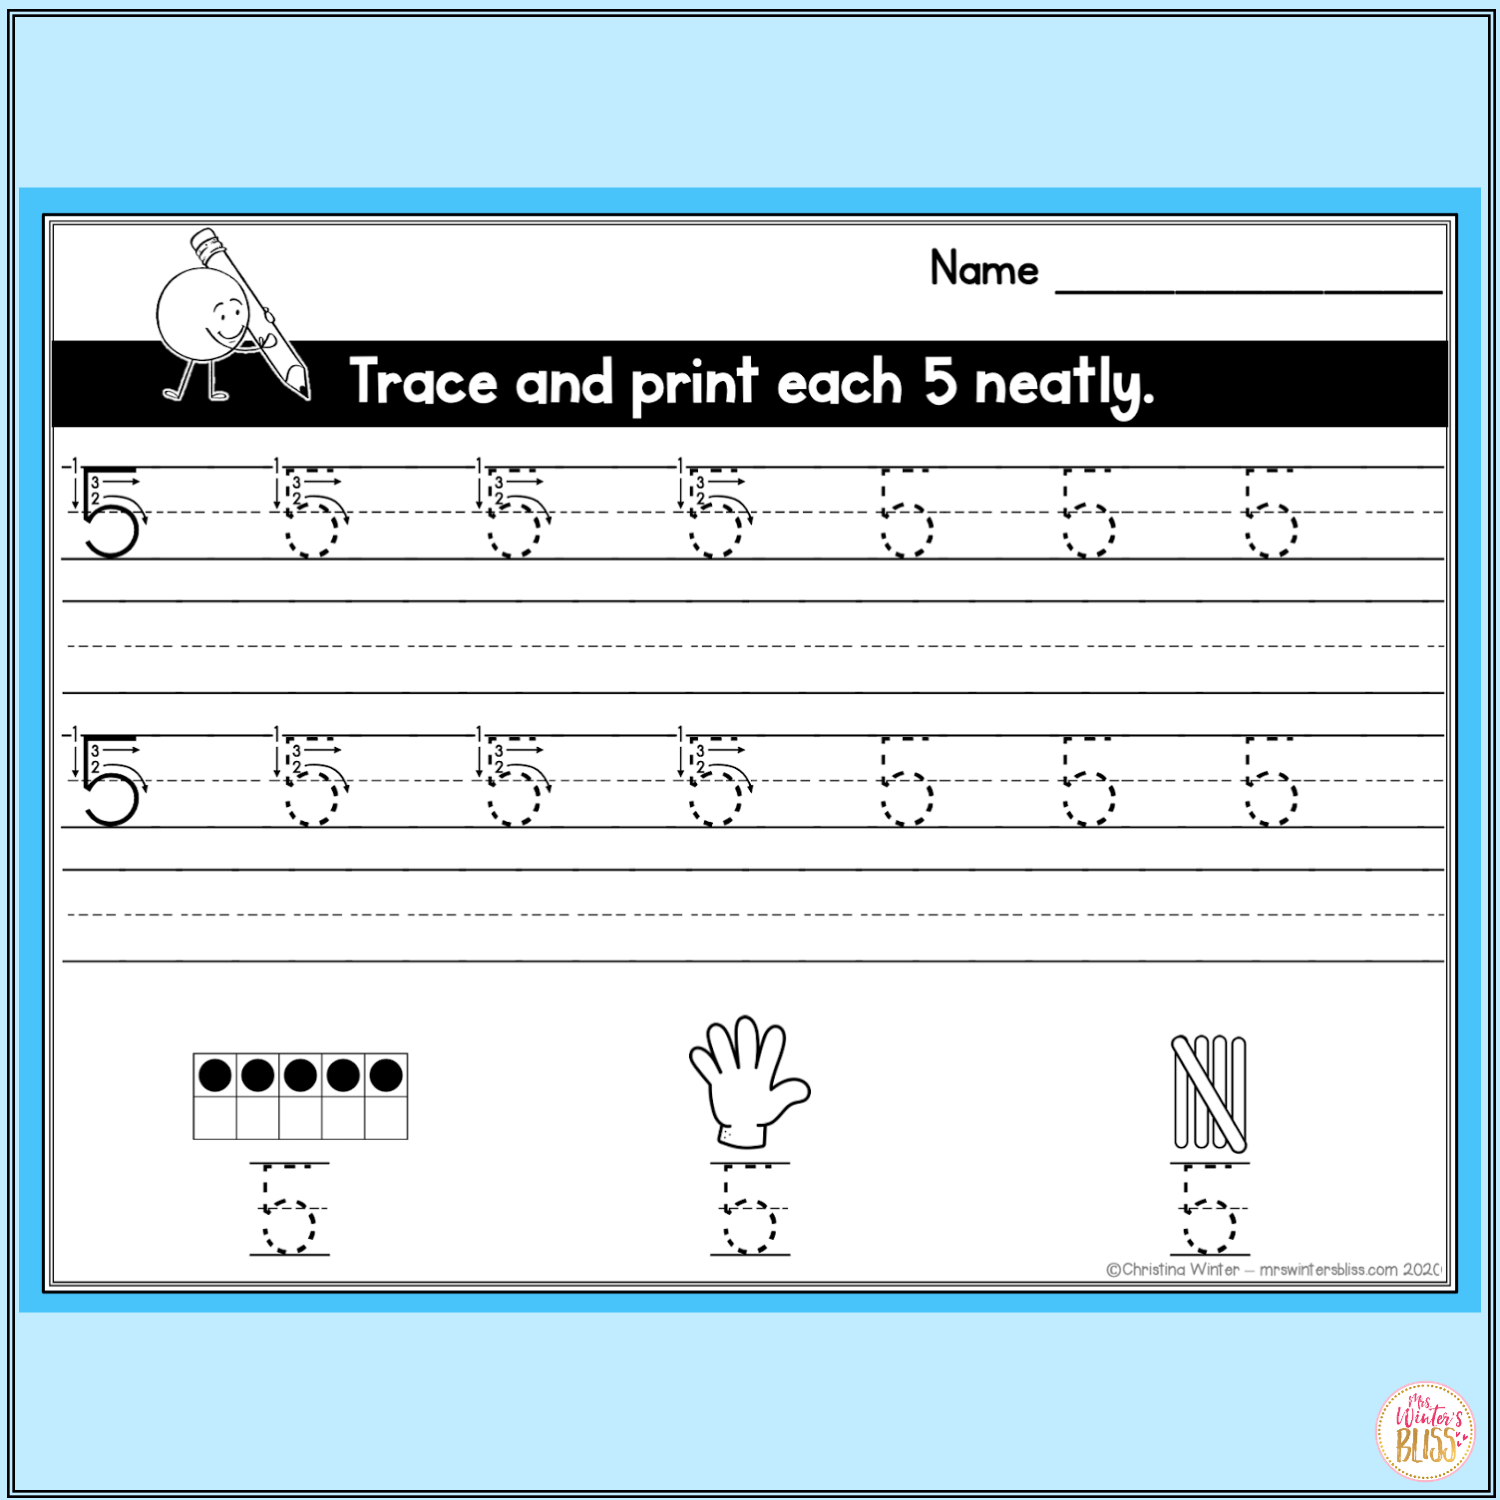 letter-number-formation-alphabet-number-tracing-worksheets-with-videos-mrs-winter-s-bliss